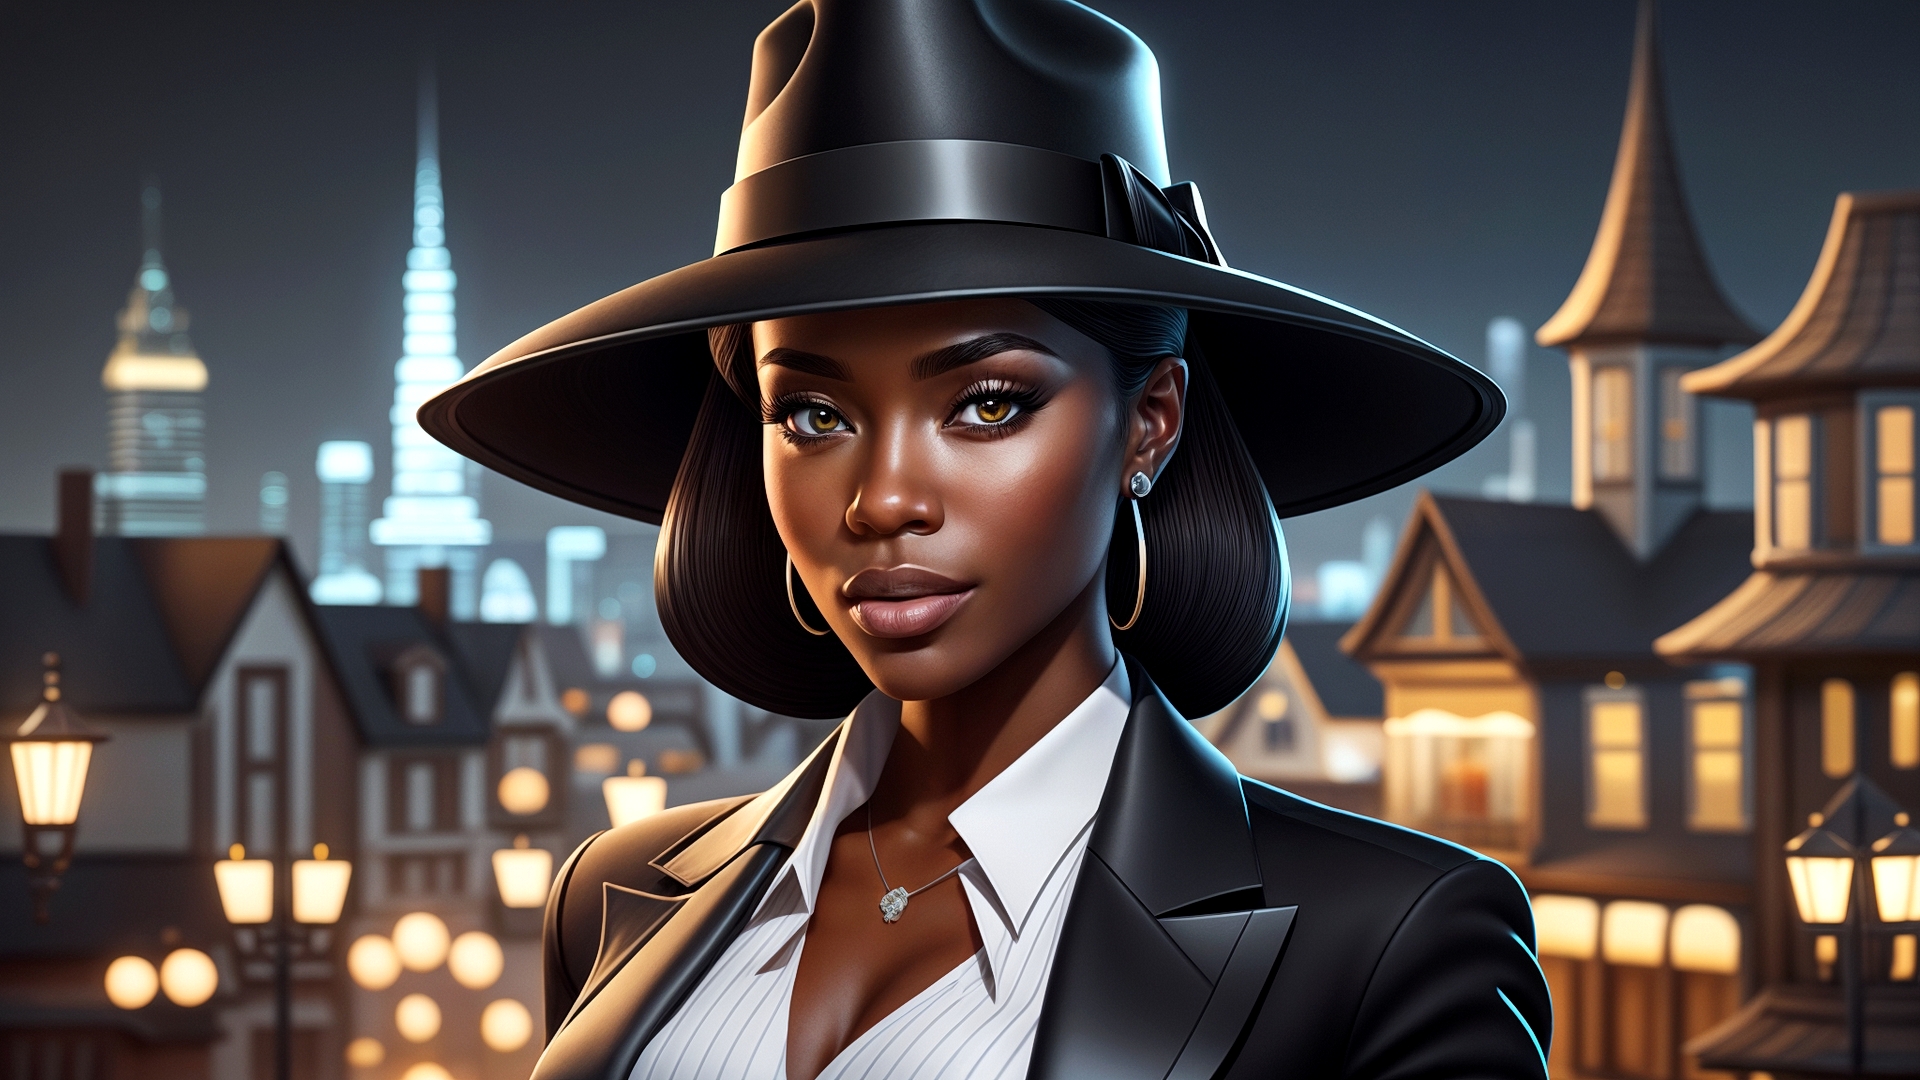 Free photo Portrait of a black girl in a hat against the background of a night city in lights